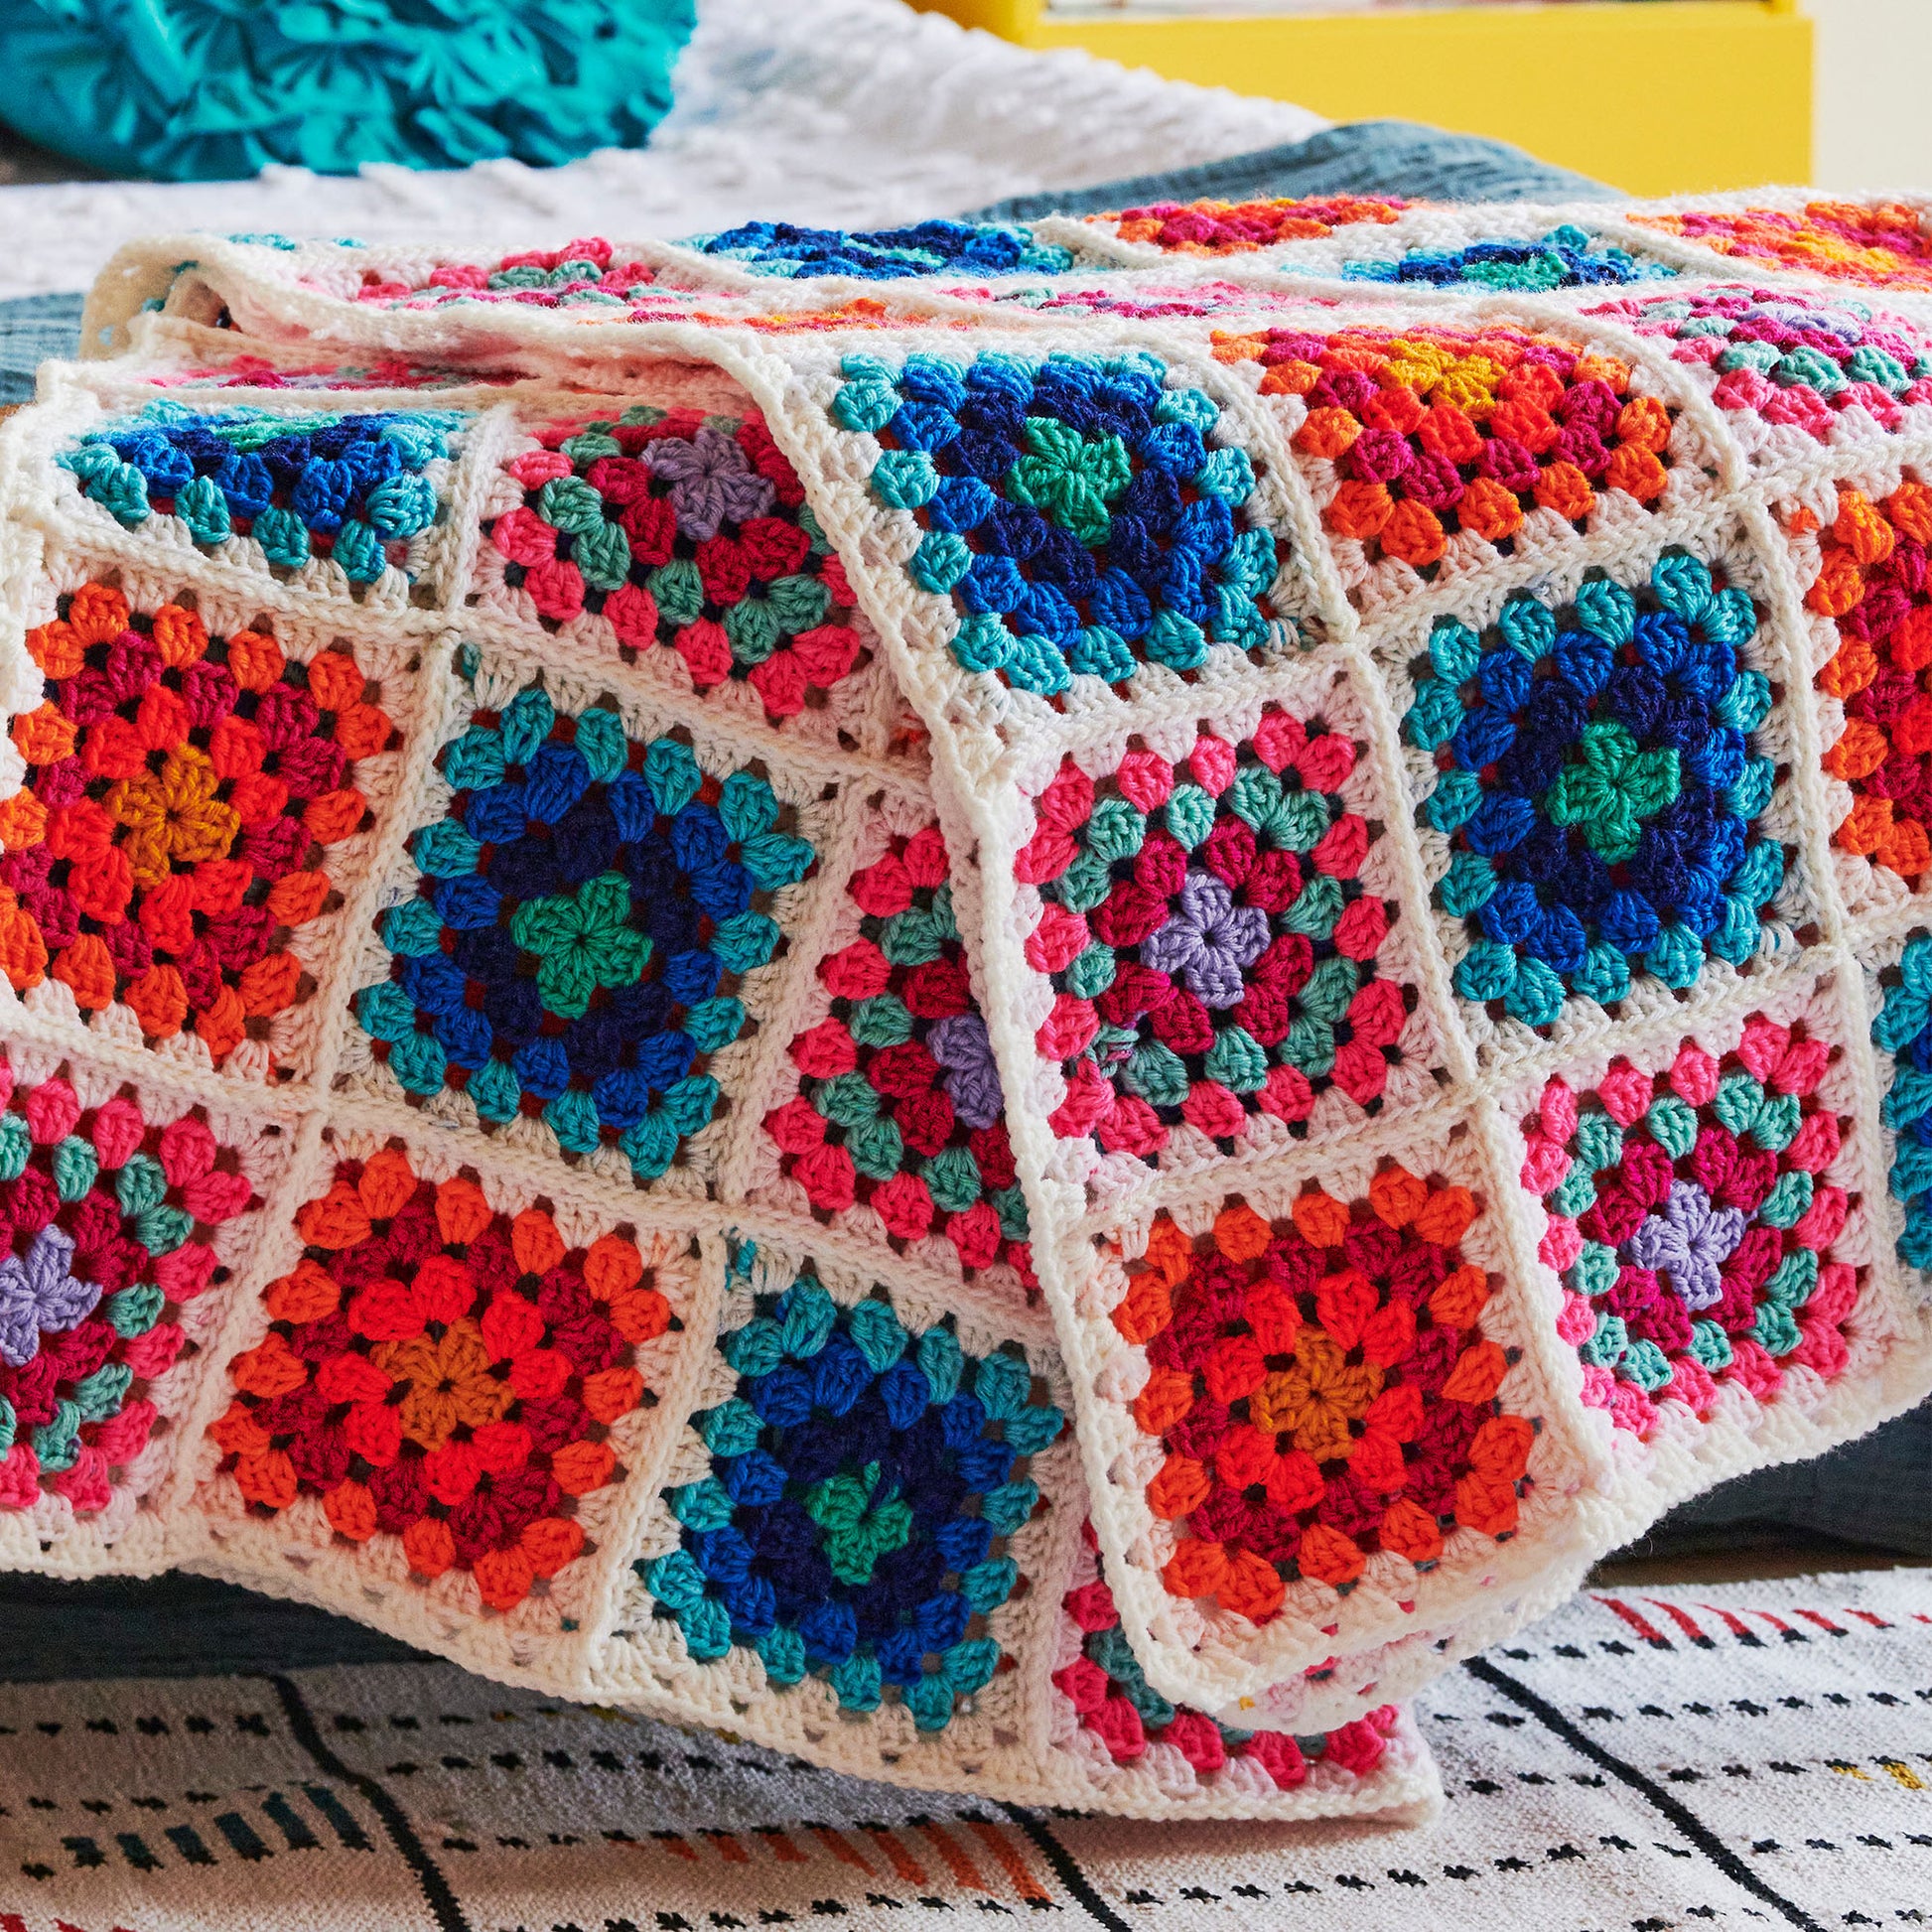 Crochet granny All in one square red heart yarn !! perfect hook